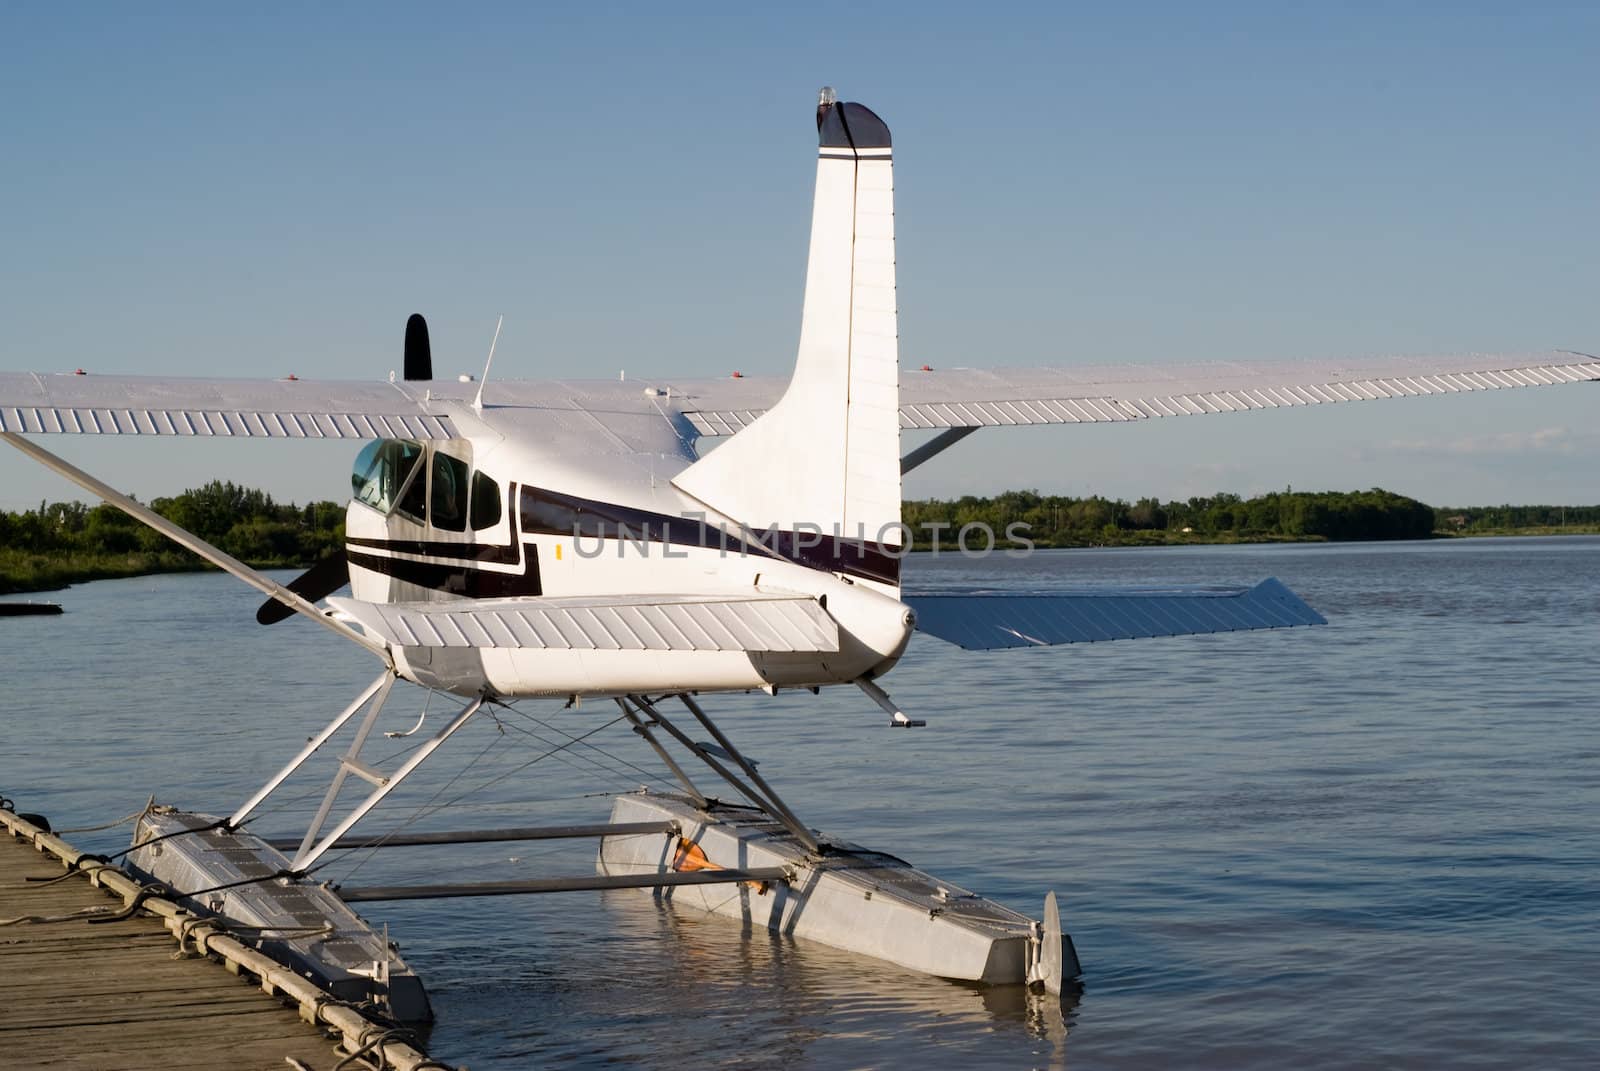 A rear view of a seaplane with the engine shut off